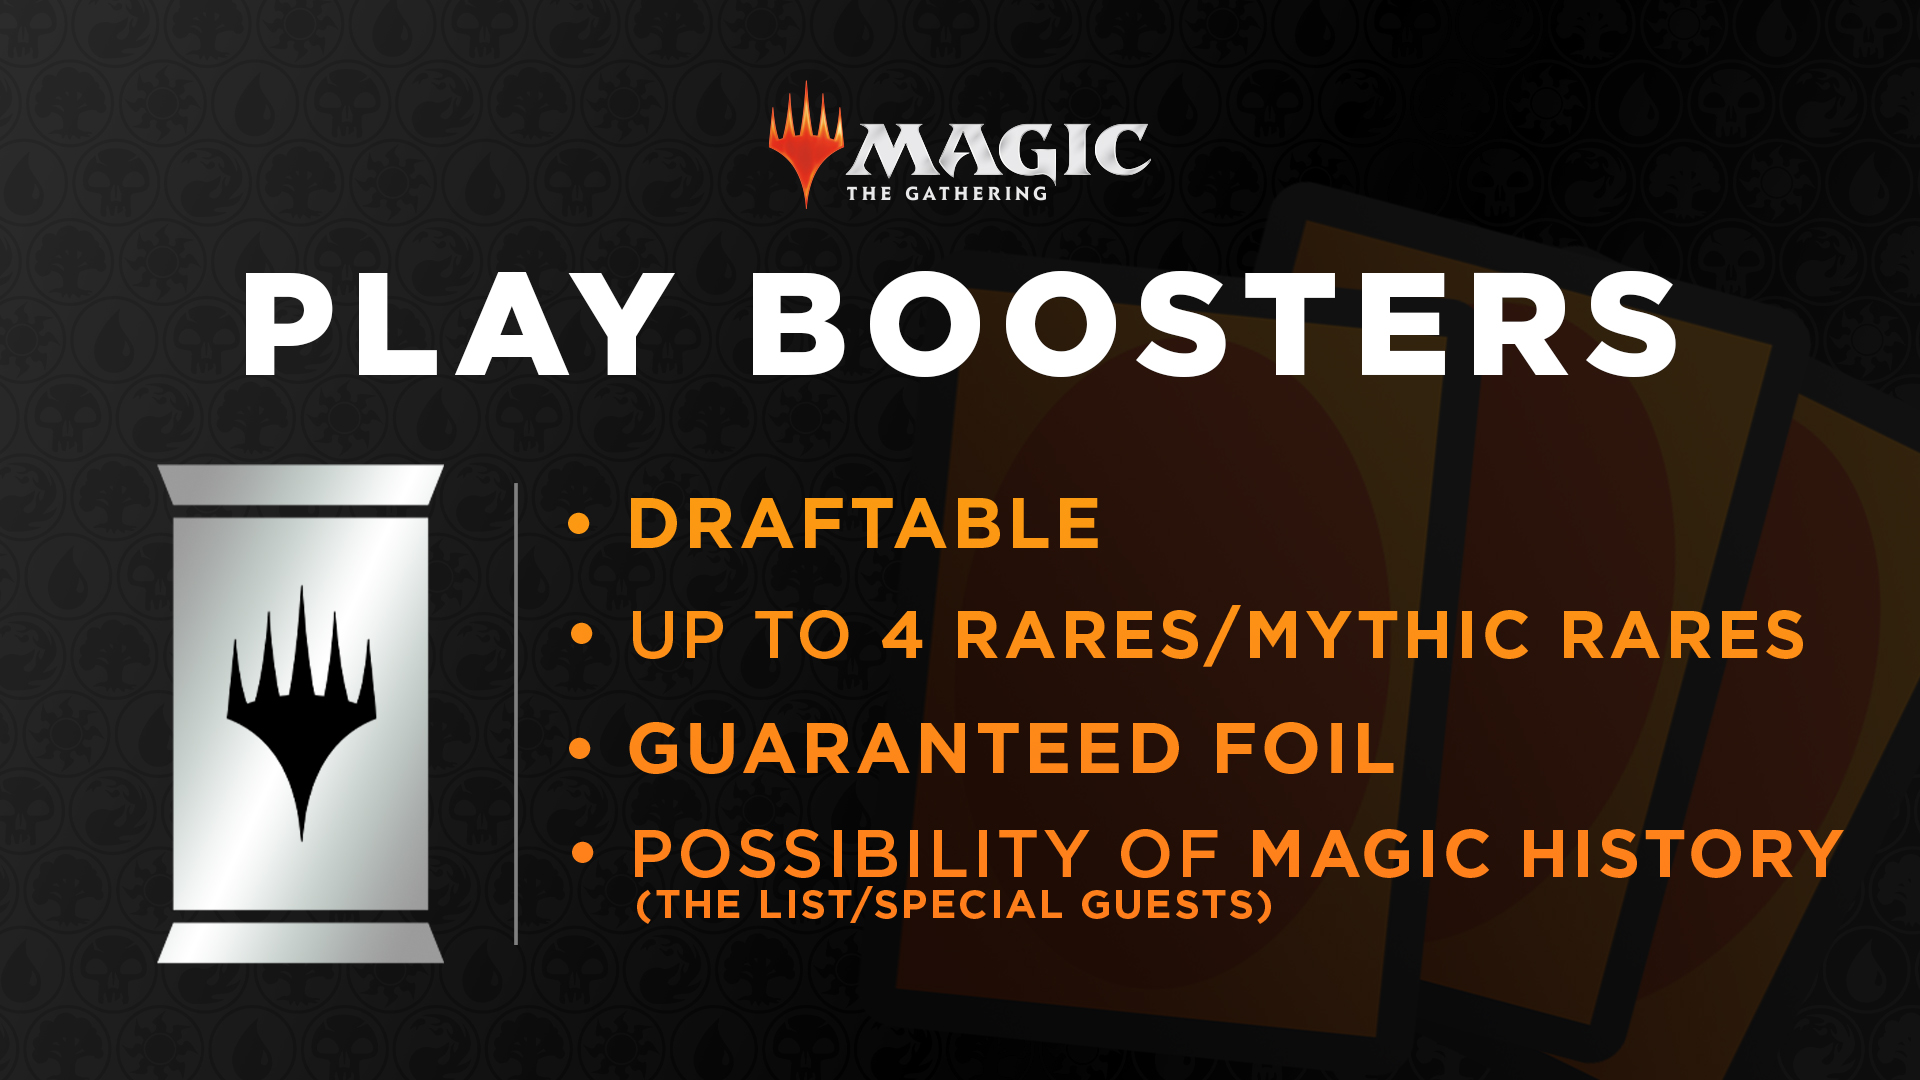 What Are Play Boosters?